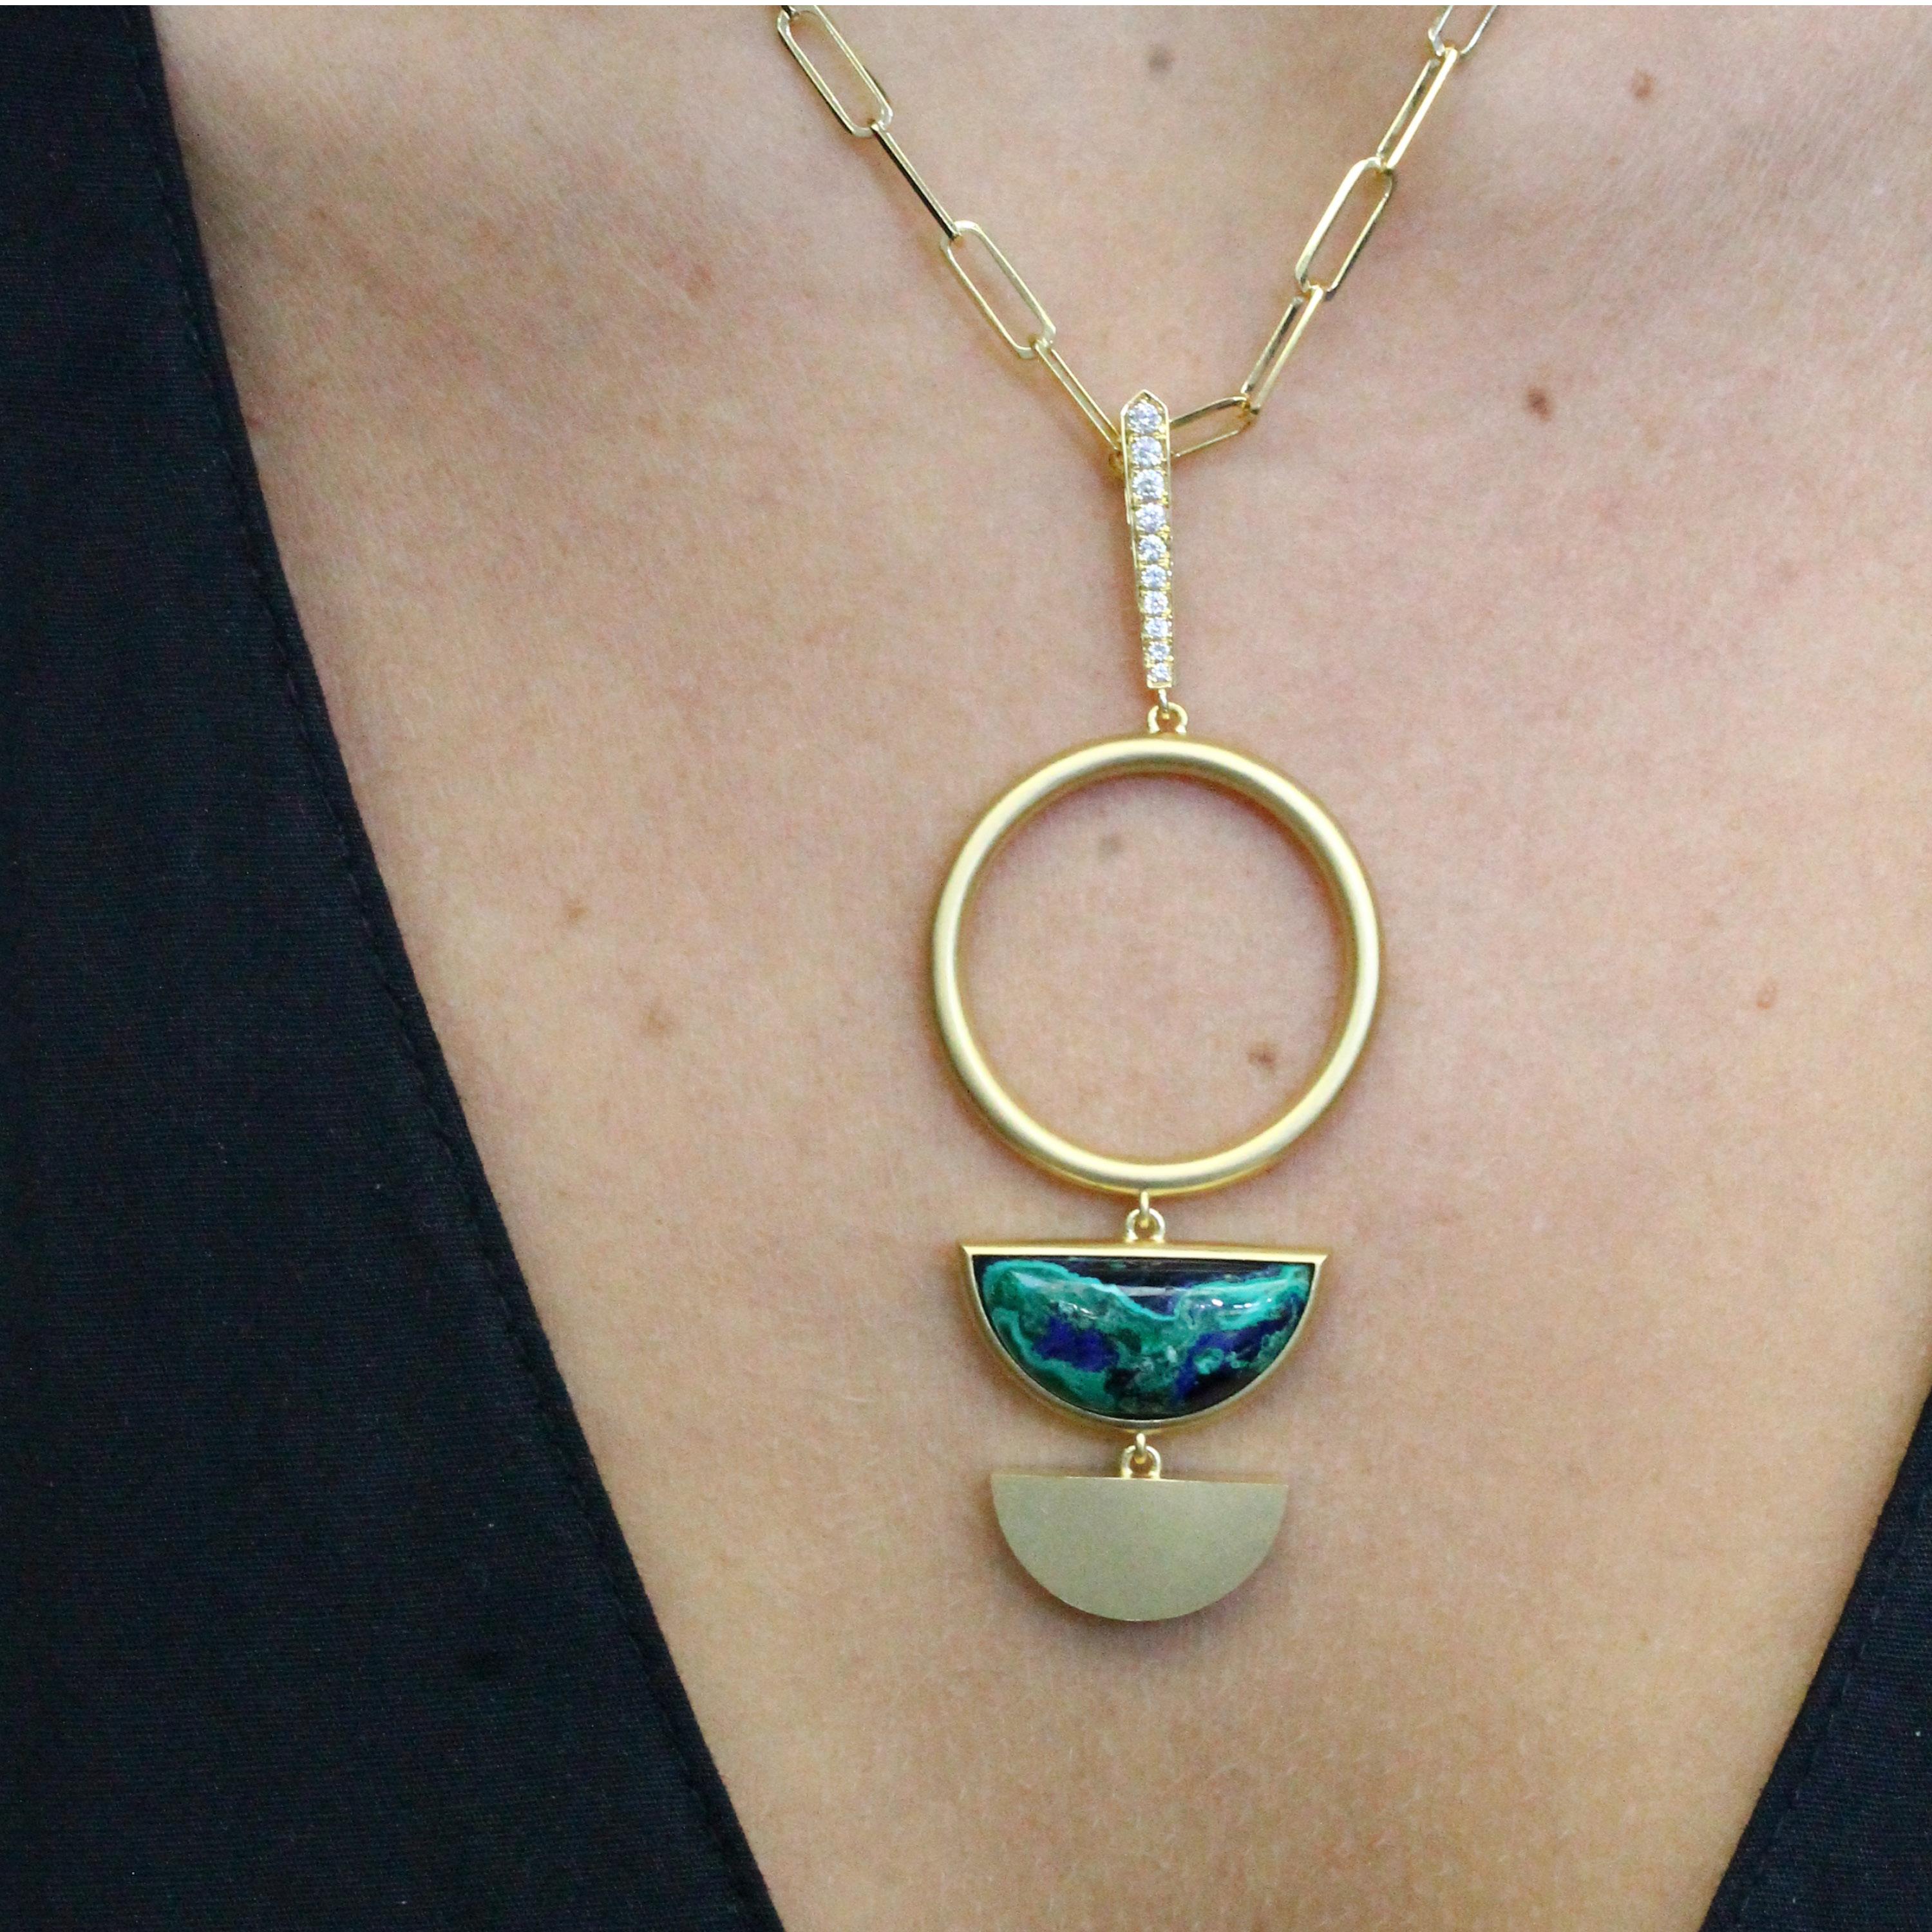 One-of-a-Kind 18K Yellow Gold Necklace featuring Azurite-Malachite and Diamonds, in a Half-Moon setting. Hangs from a 18K 18